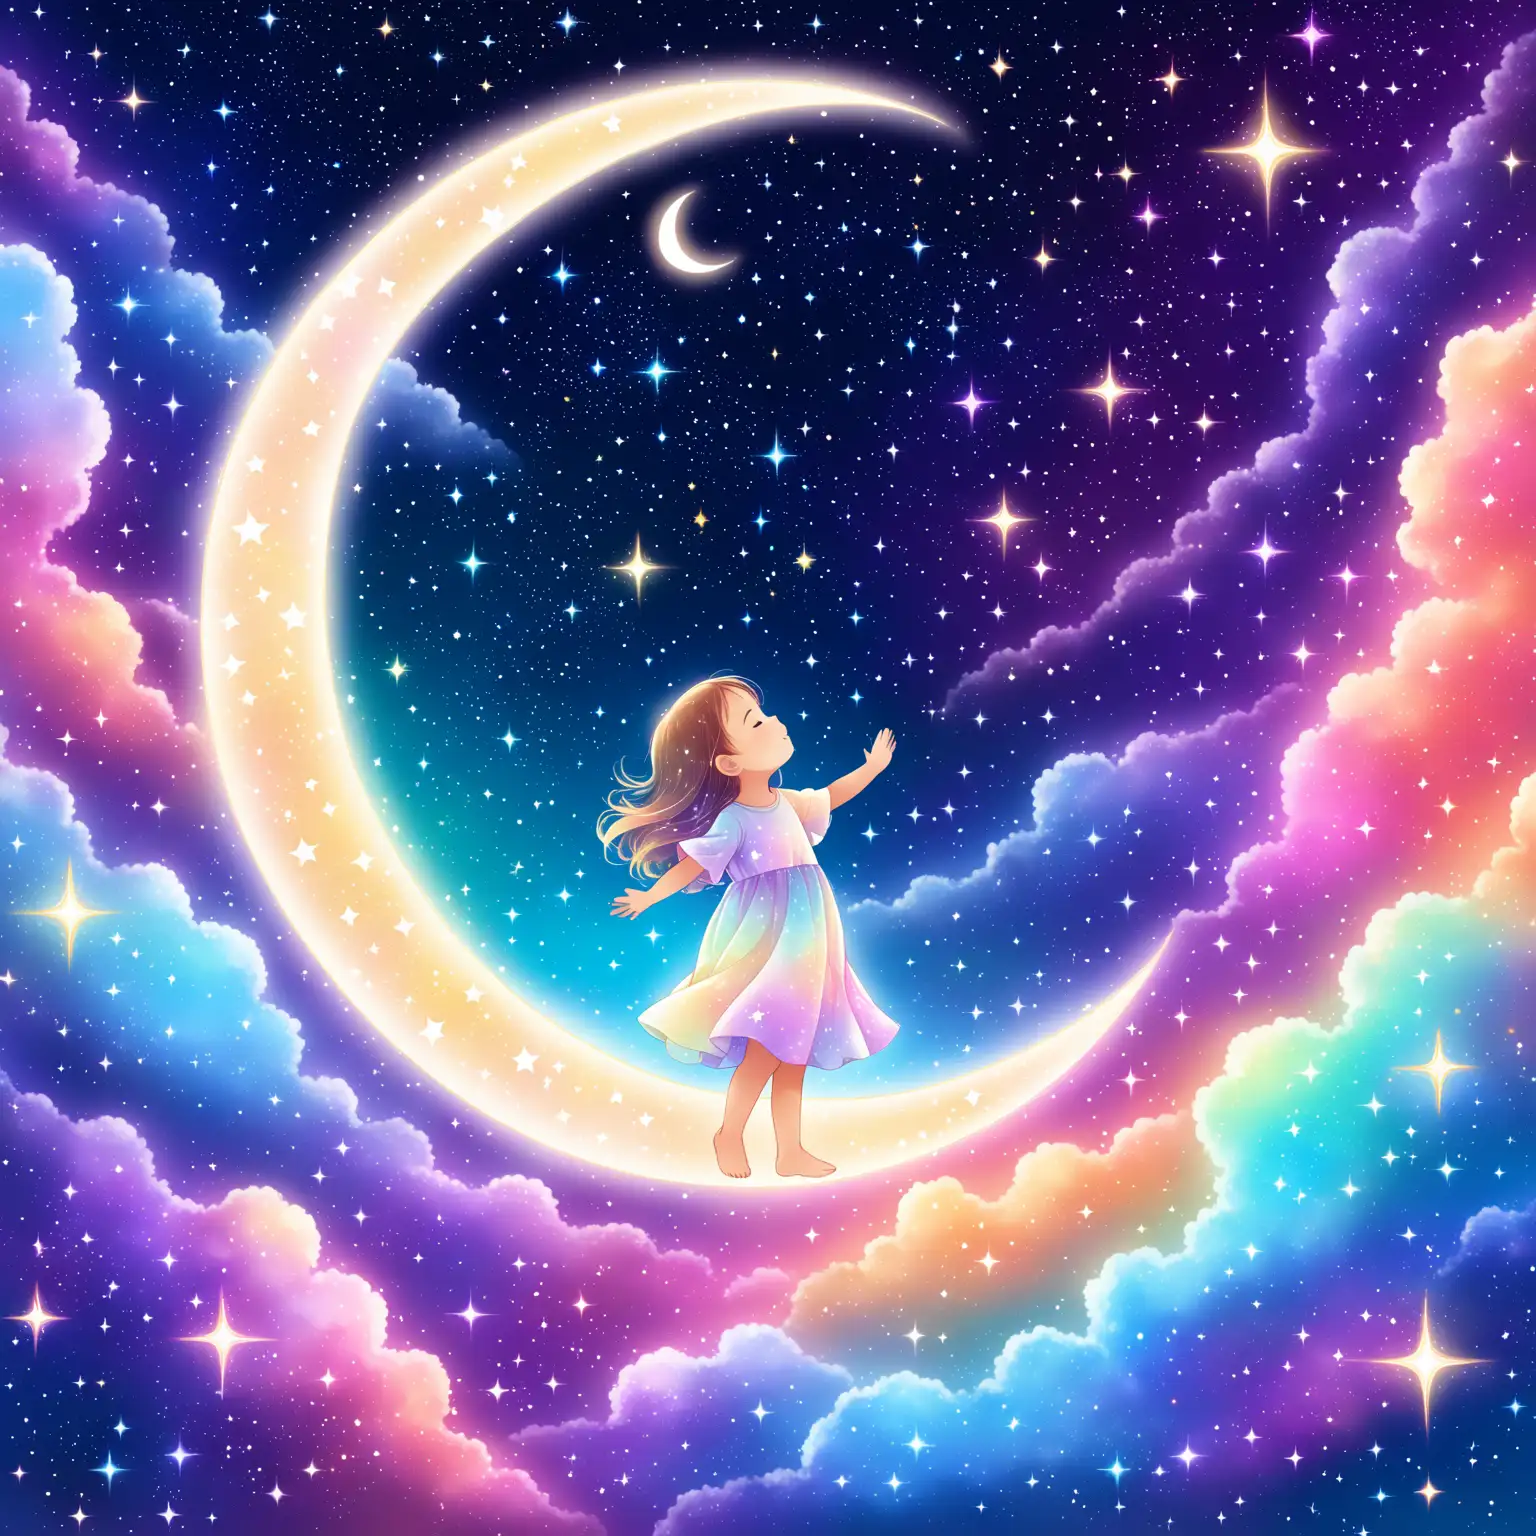 Child Gazing at Colorful Celestial Dreams Nebula Clouds and Crescent Moon